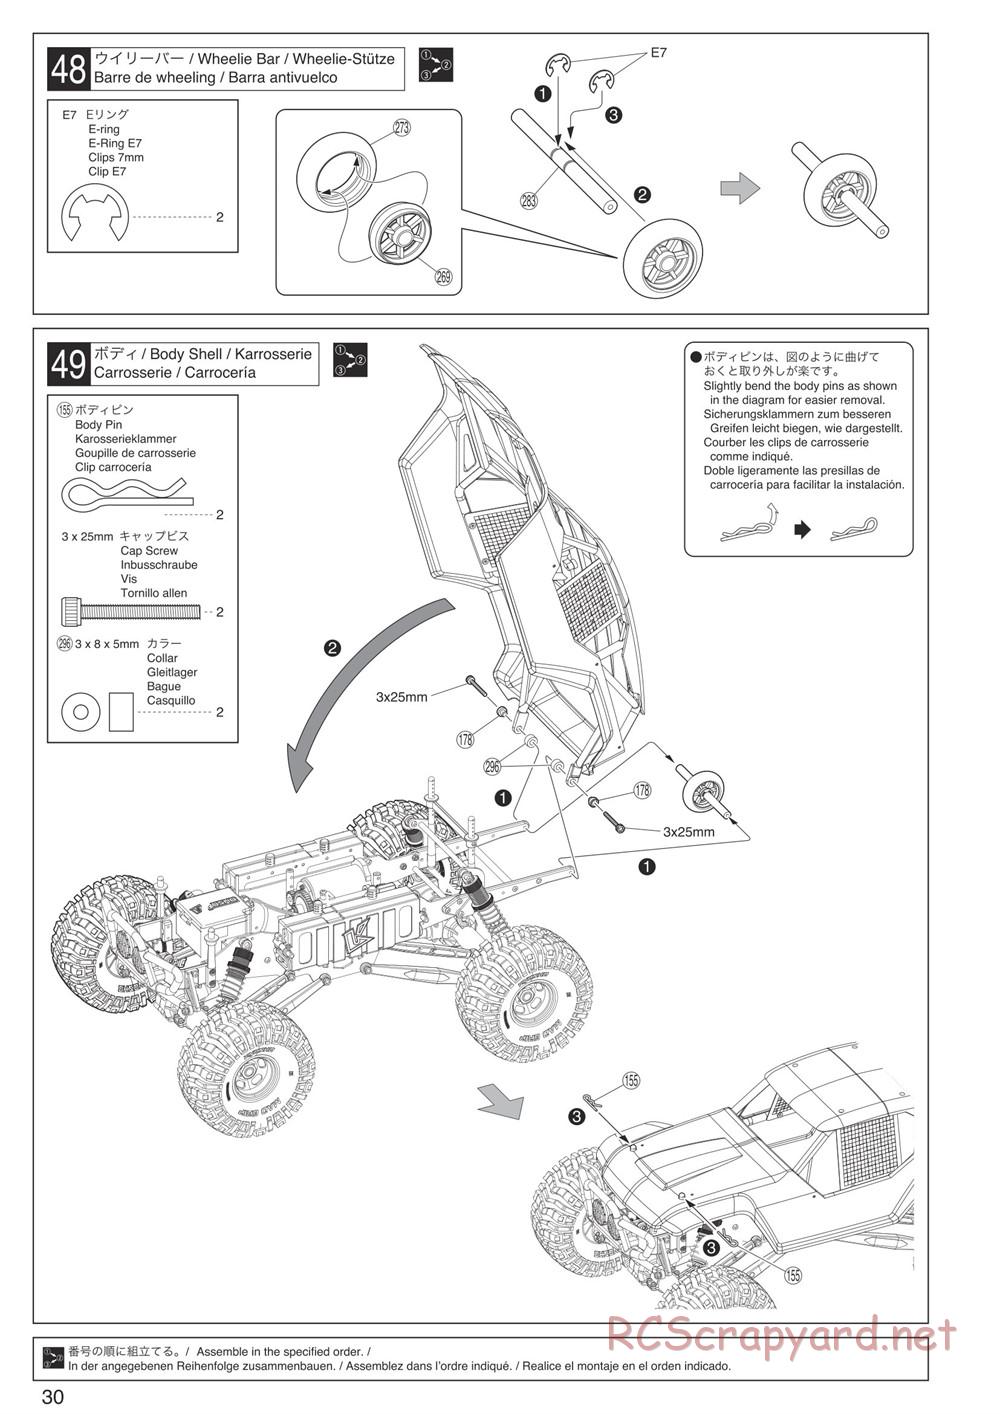 Kyosho - FO-XX VE 2.0 - Manual - Page 30